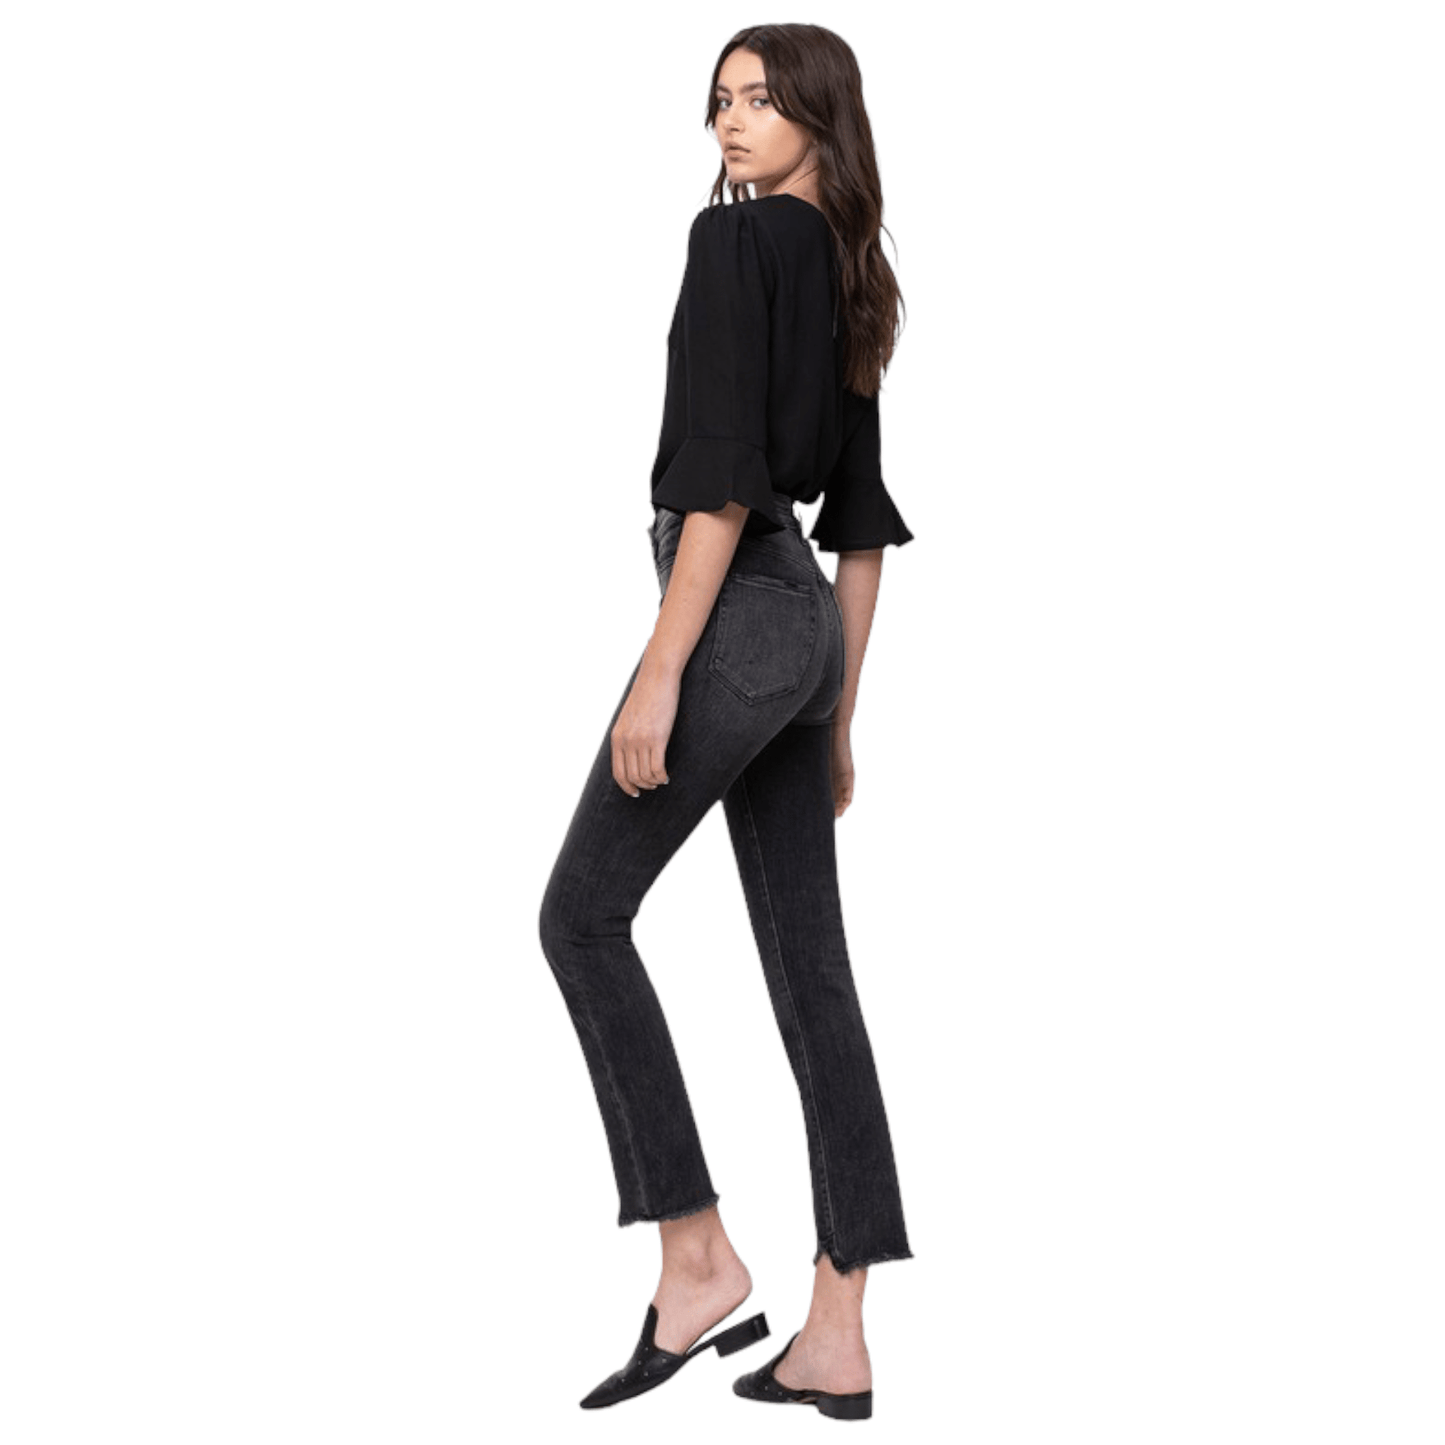 High Rise straight crop with uneven hem detail black jeans by Flying Monkey